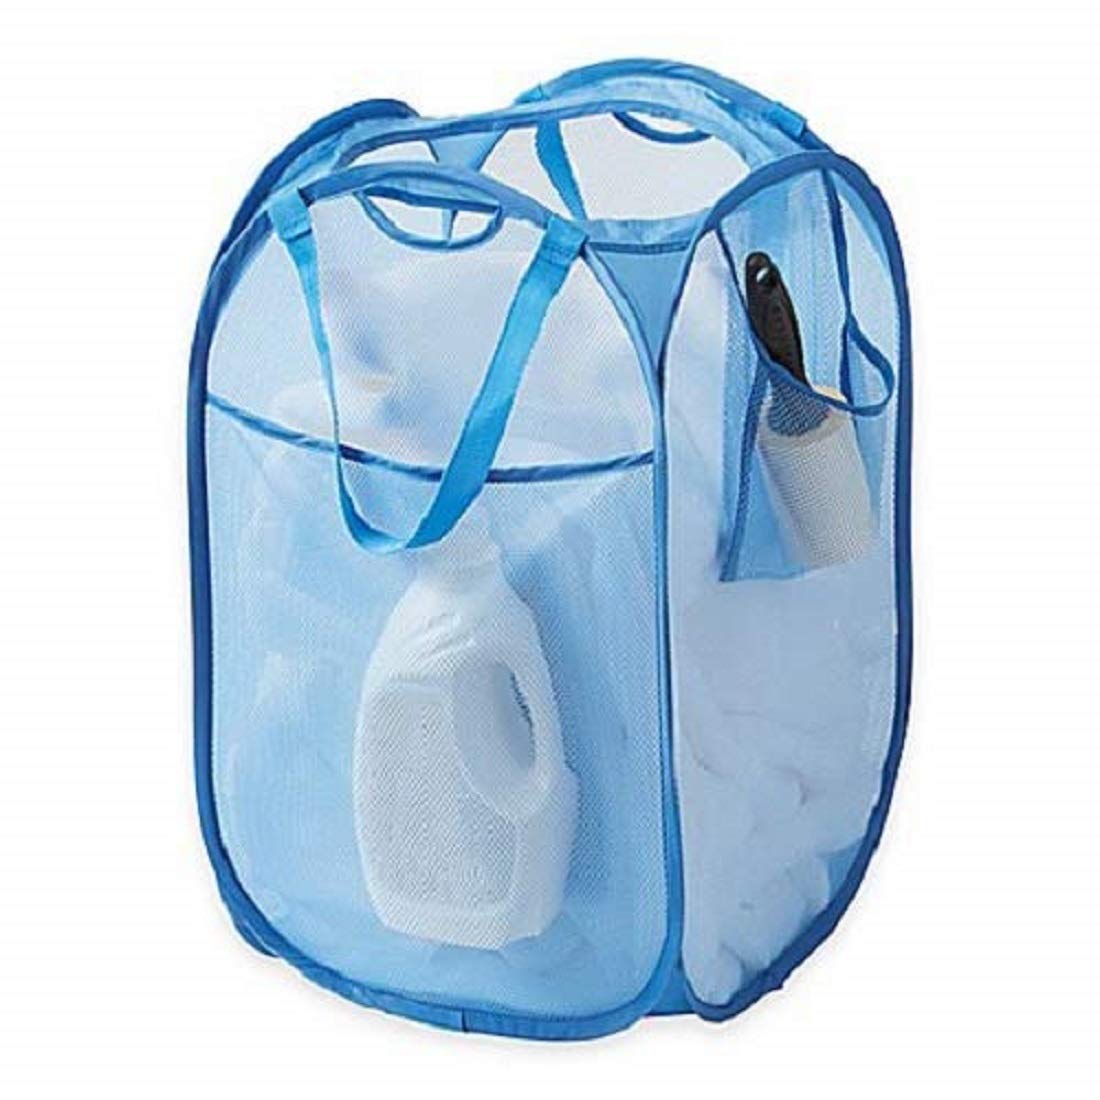 Kuber Industries Nylon Mesh Laundry Basket|Sturdy Material & Durable  Handles|Netted Lightweight Laundry Bag (Assorted)